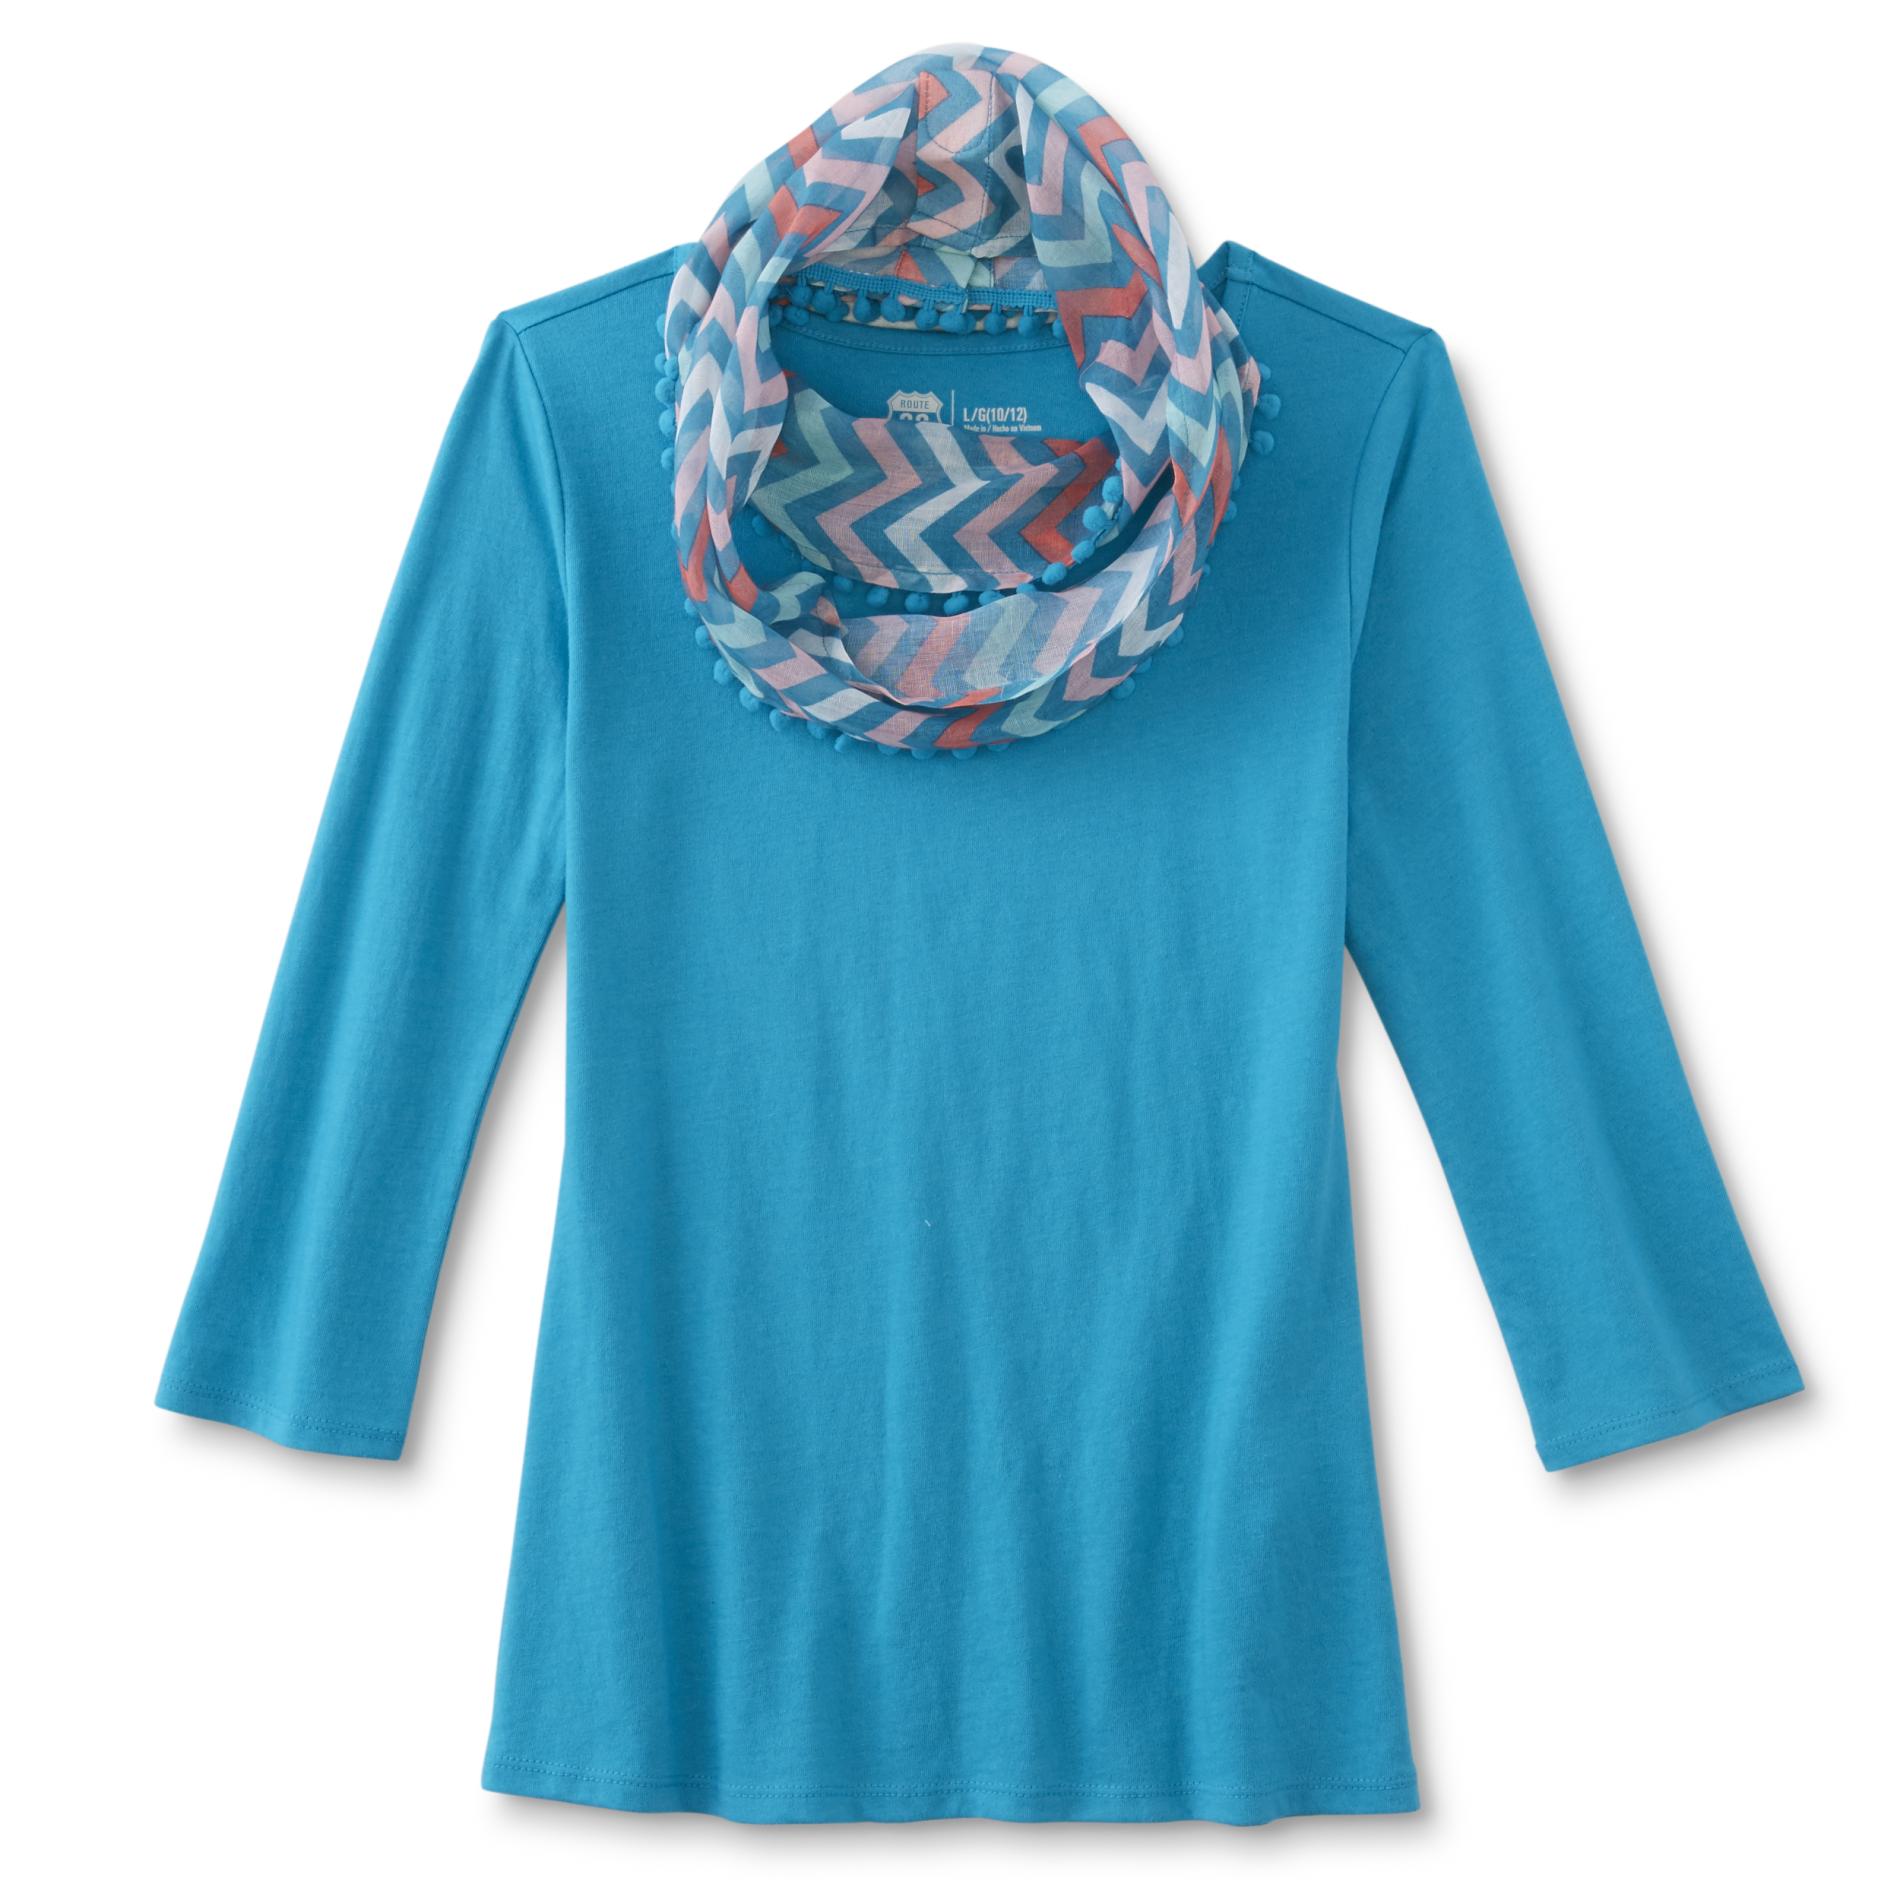 Route 66 Girls' Top & Infinity Scarf - Chevron